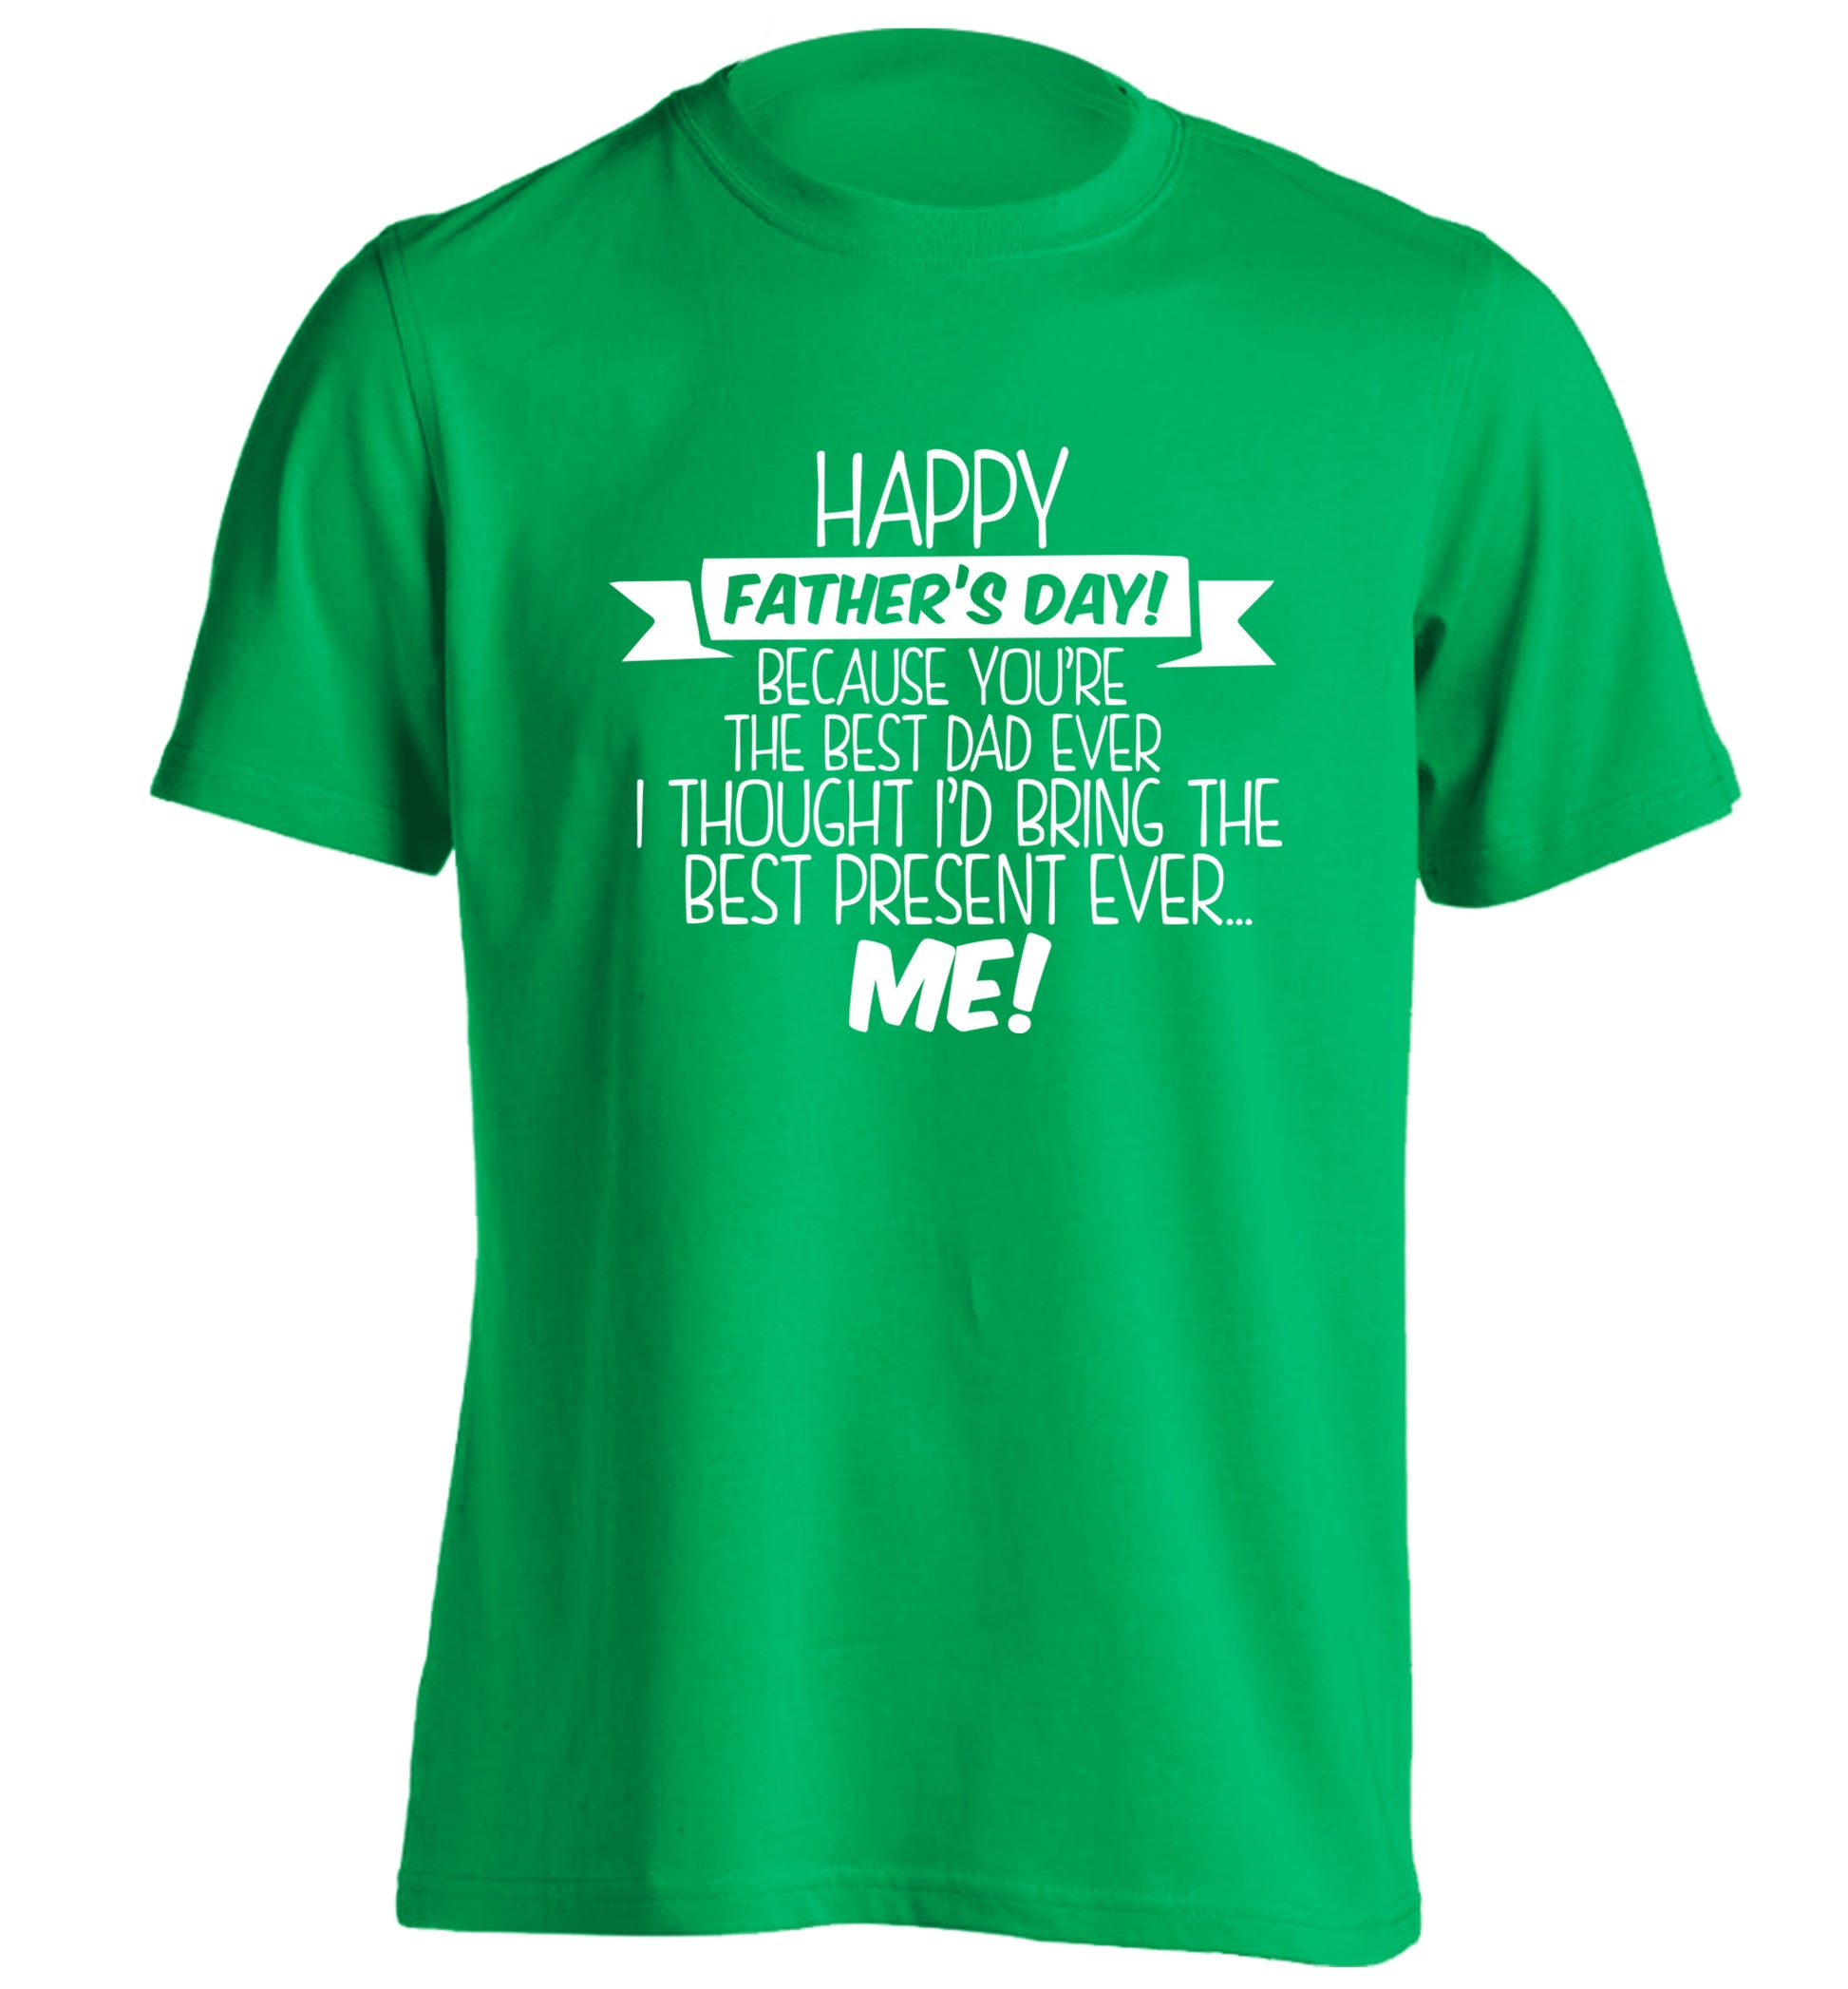 Happy Father's day, because you're the best dad ever I thought I'd bring the best present ever...me! adults unisex green Tshirt 2XL